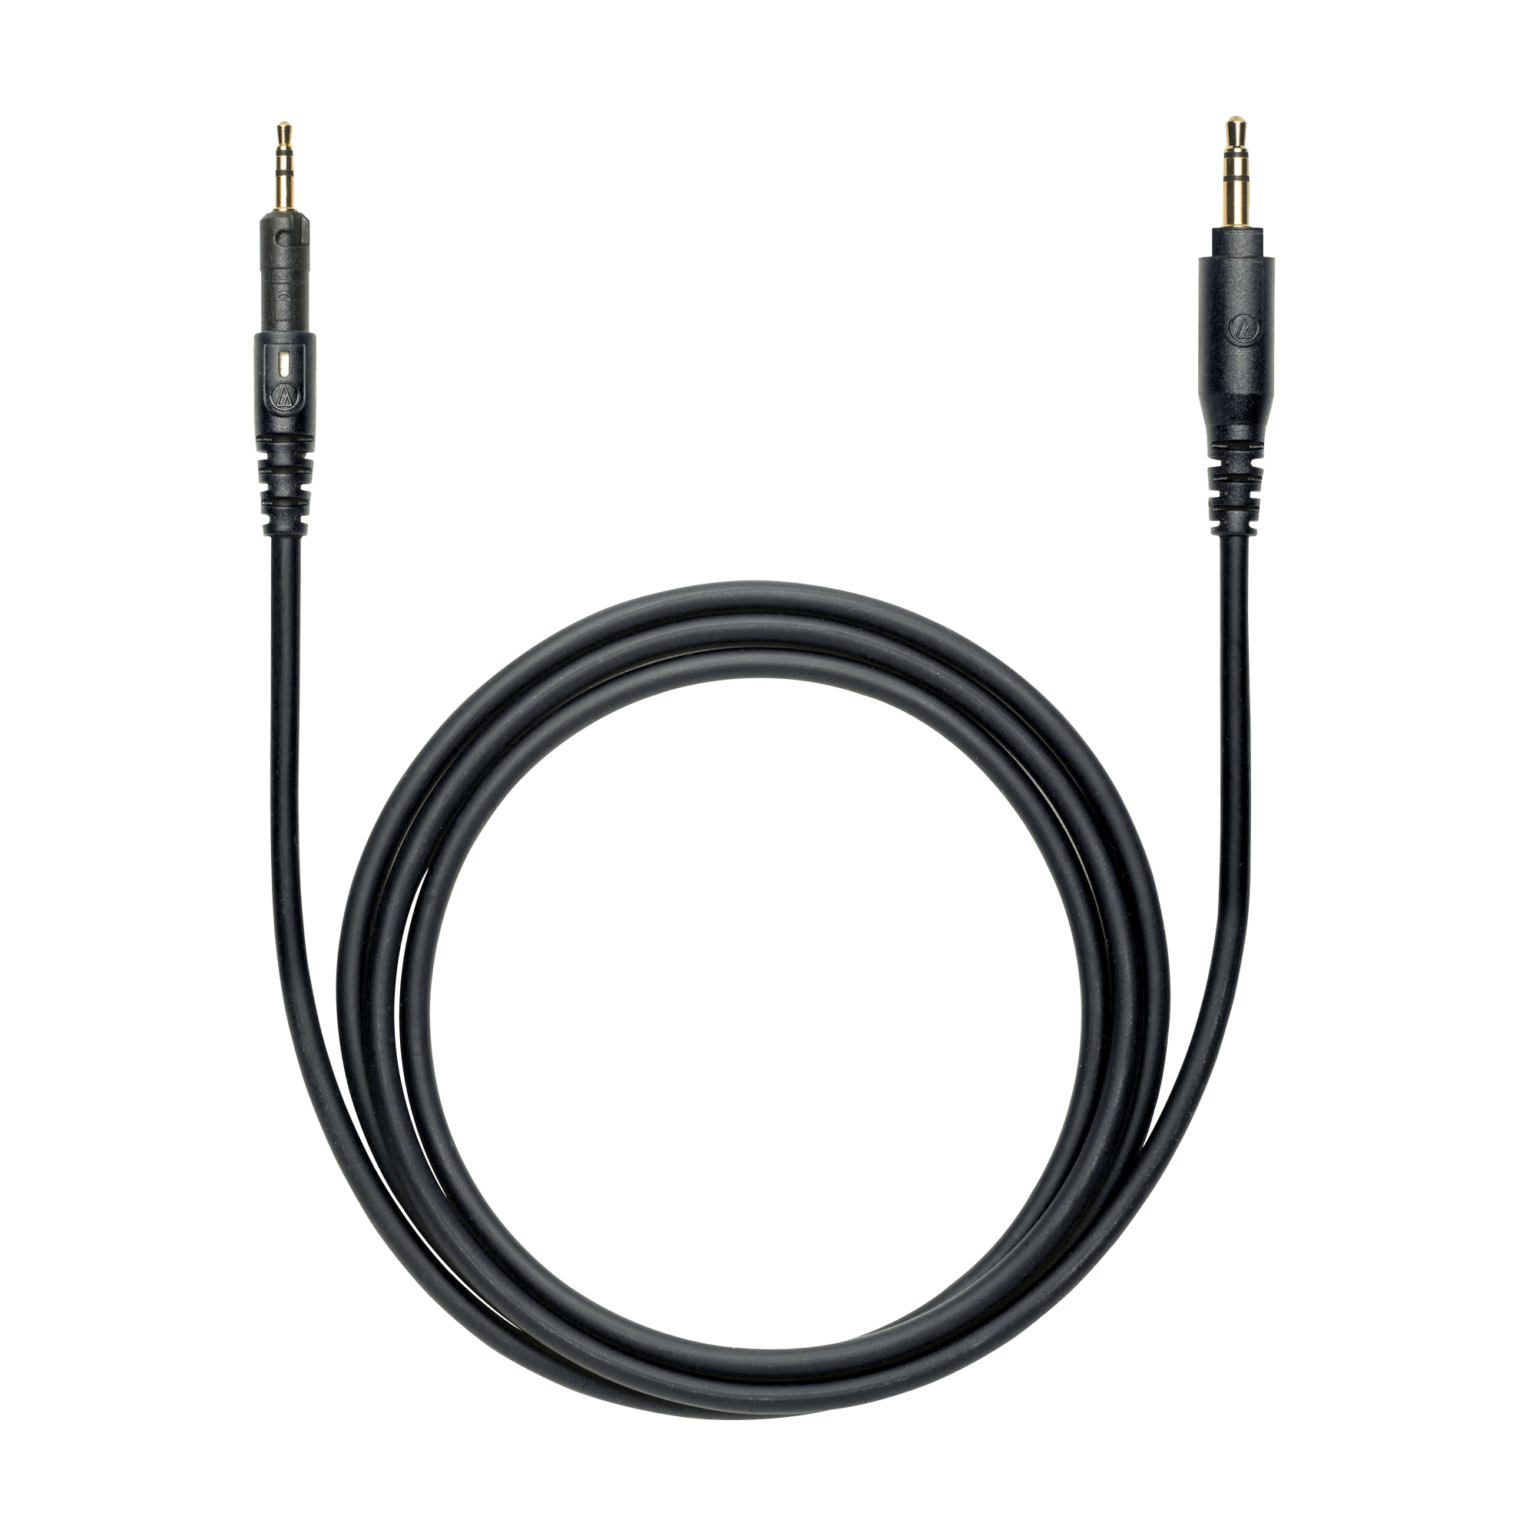 ATH-M50x Headphone Cable